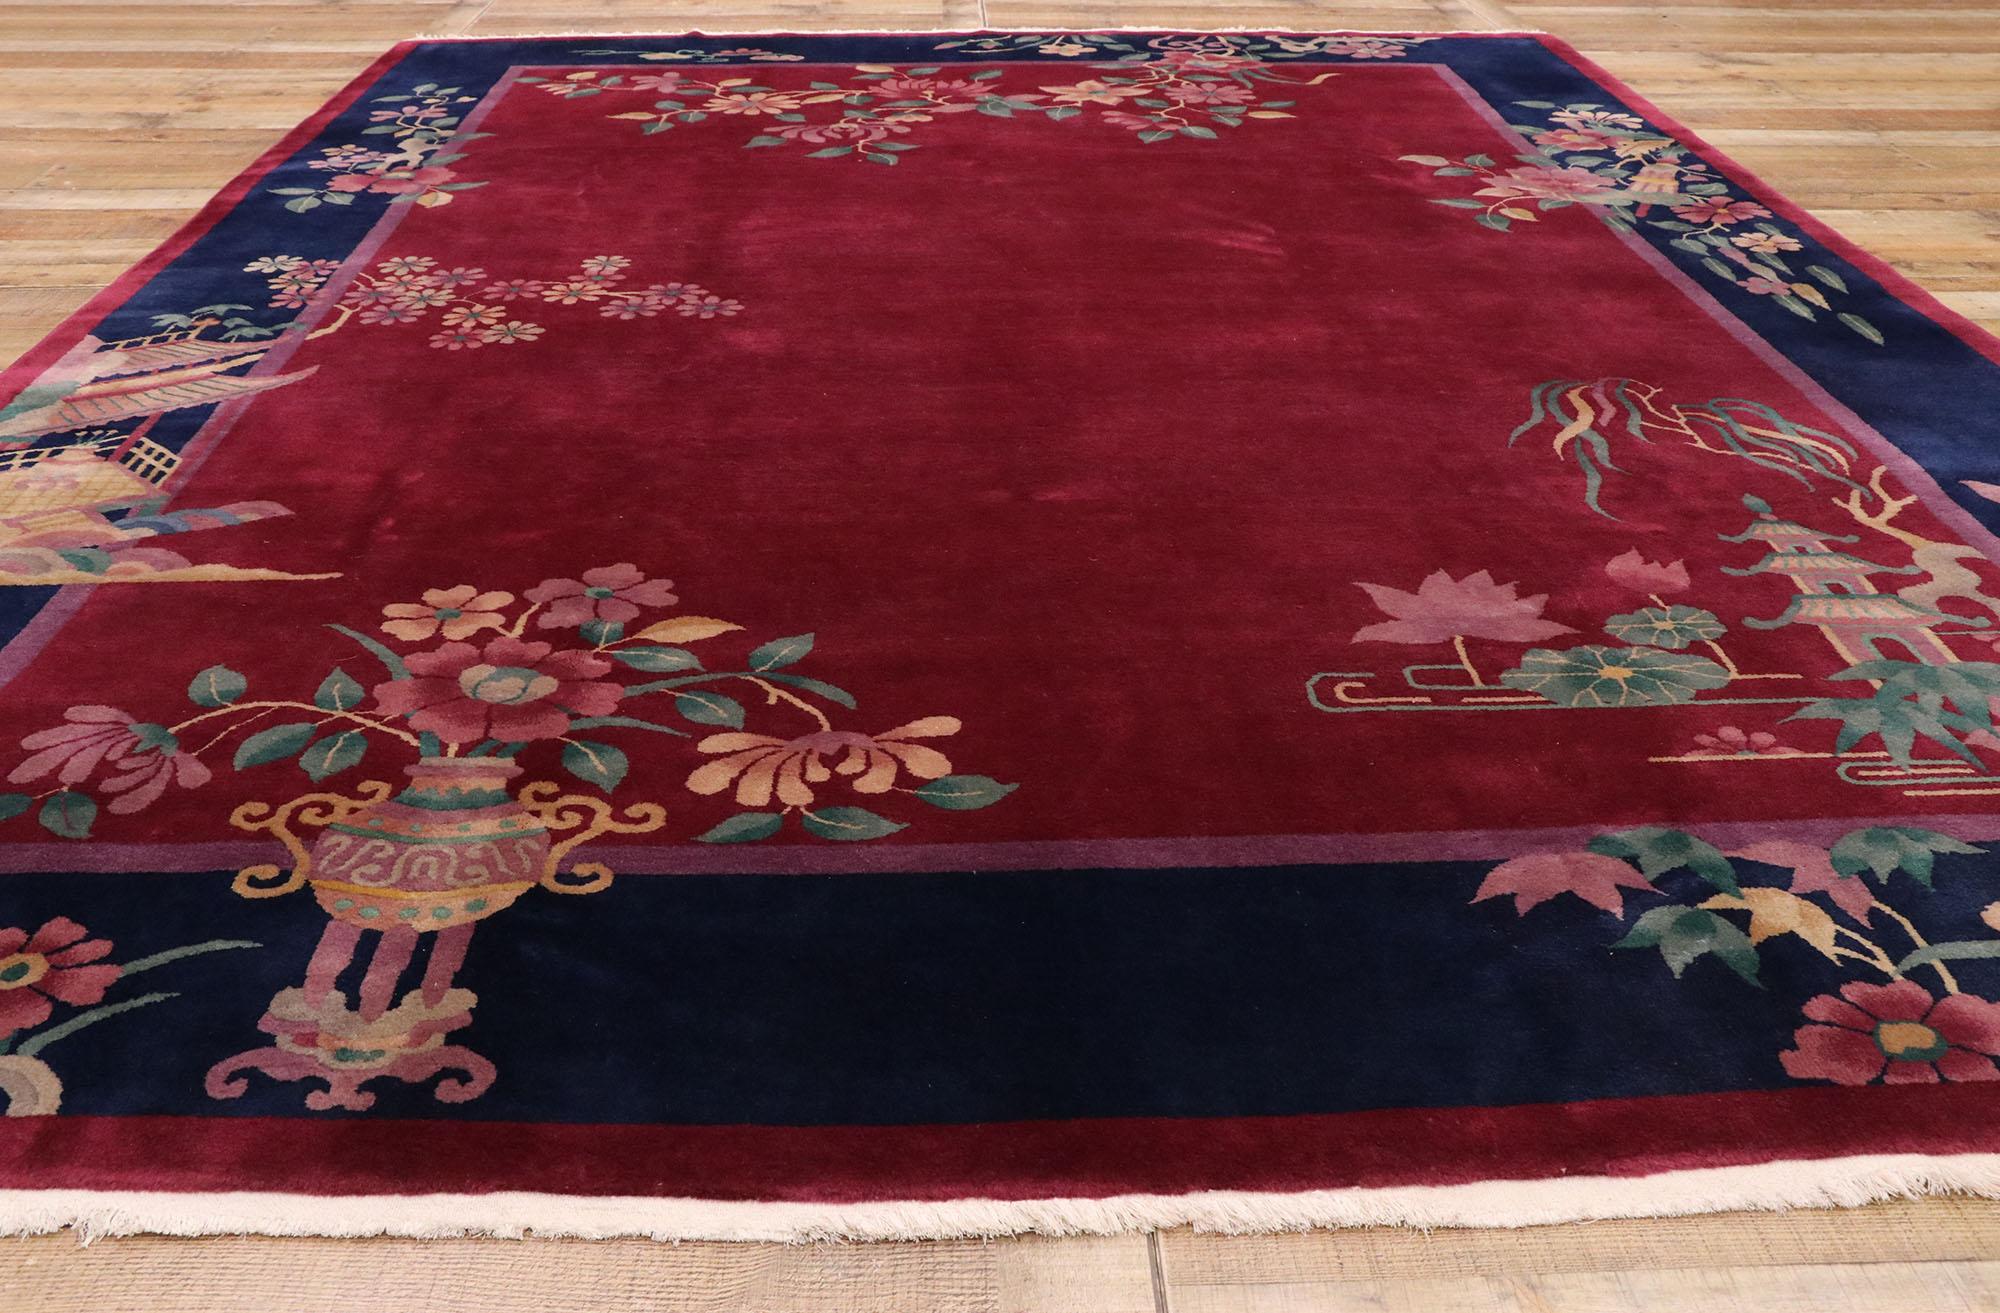 Antique Chinese Art Deco Rug Inspired by Walter Nichols with Jazz Age Style In Good Condition For Sale In Dallas, TX